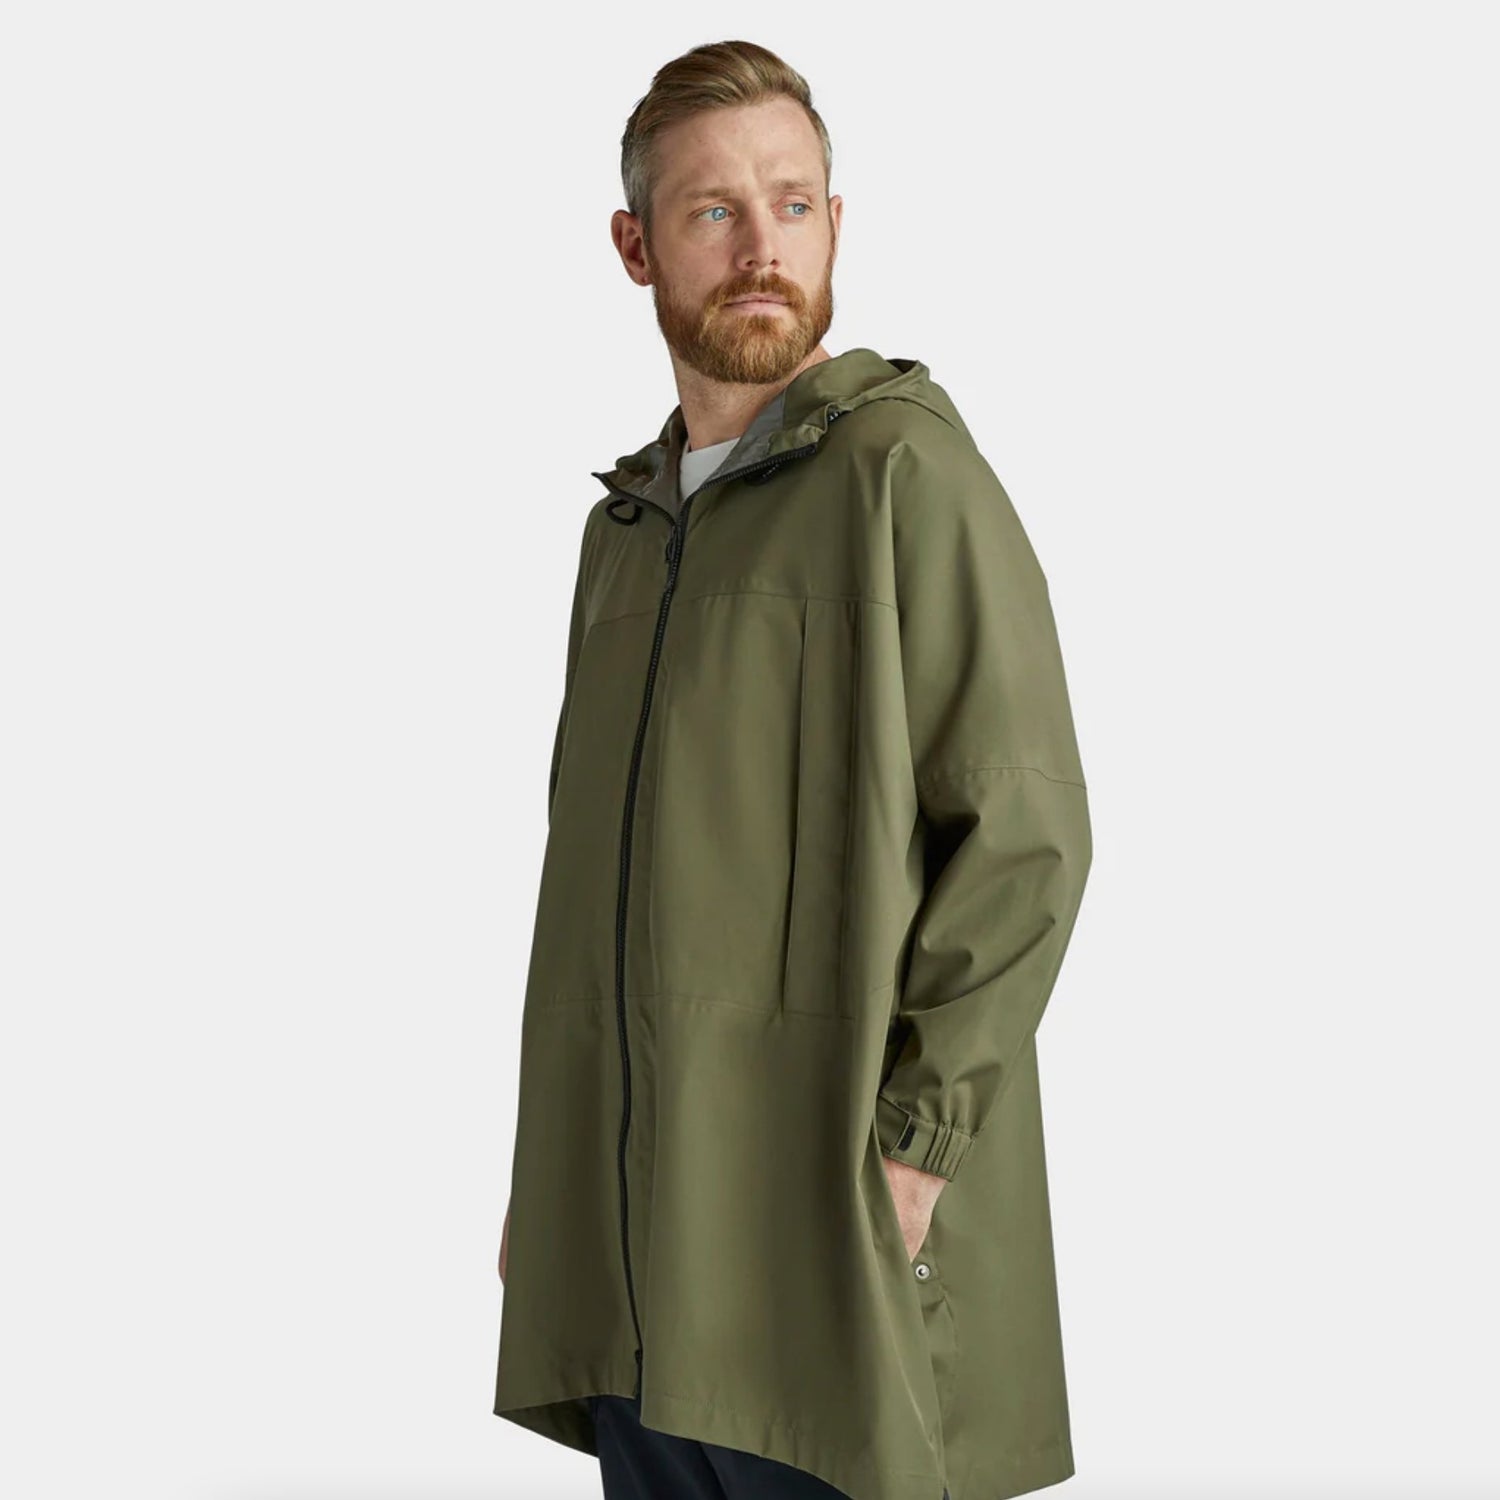 Tilley - Unisex Packable Hooded Poncho - The Flower Crate